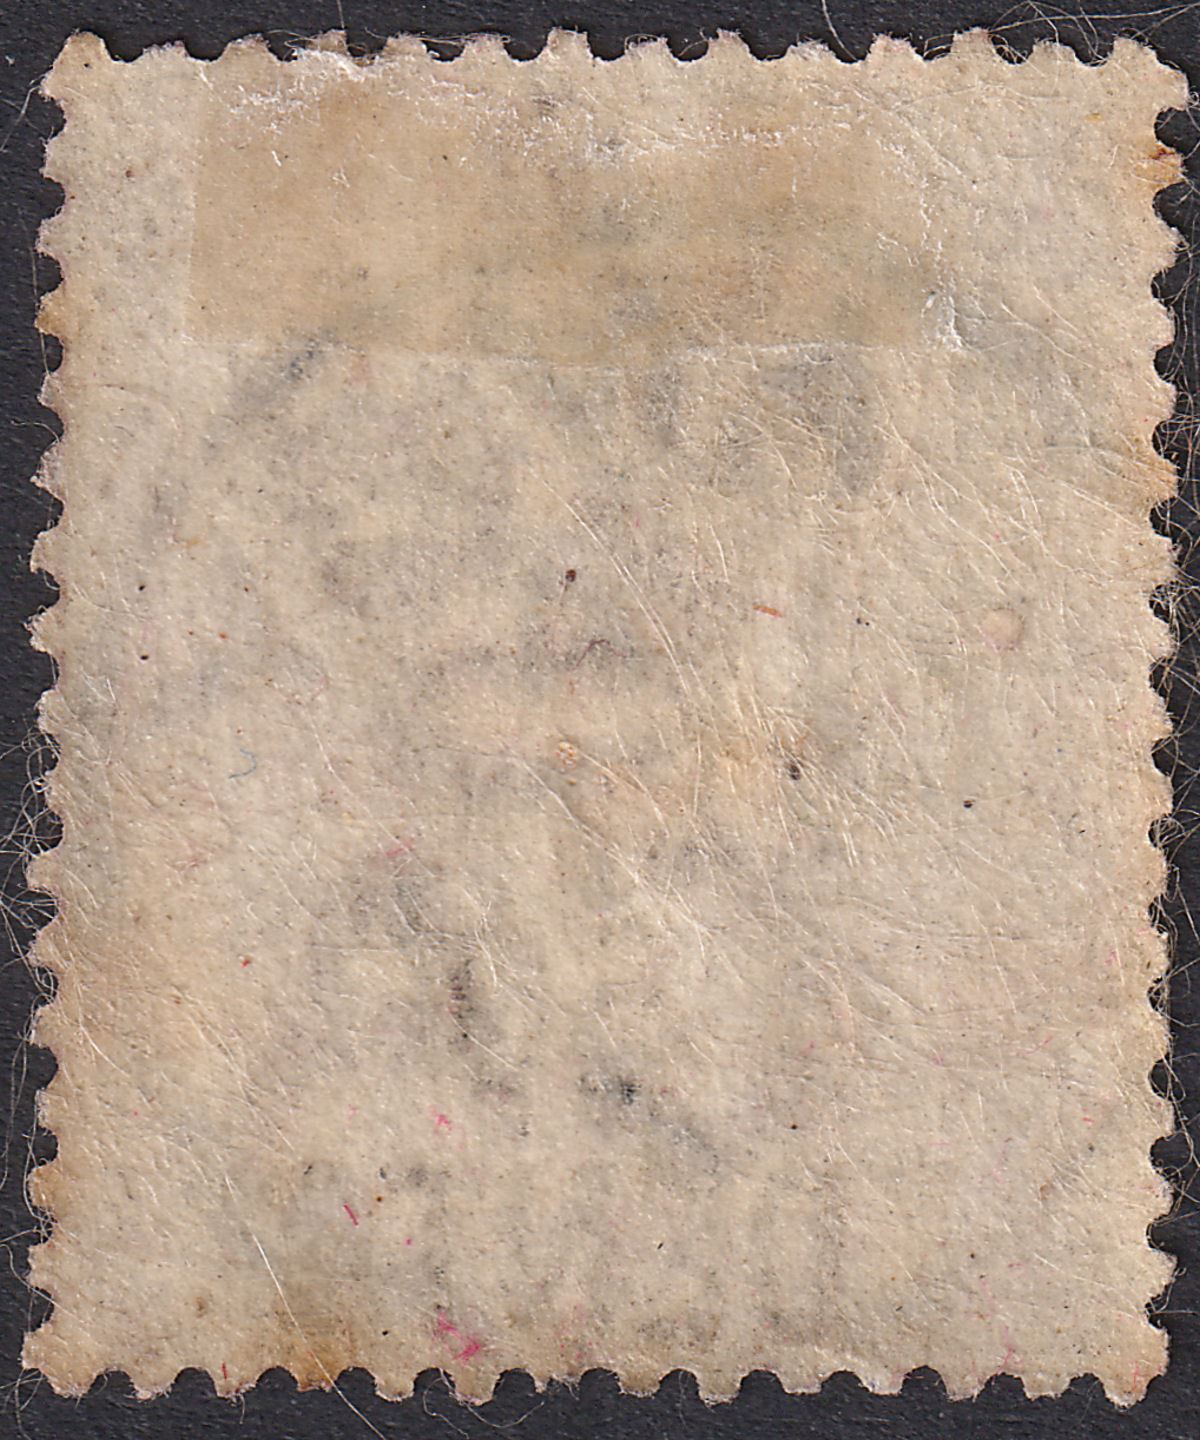 Hong Kong 1897 QV 50c Surch on 48c Used with AMOY code A Postmark SG Z45 cat £20